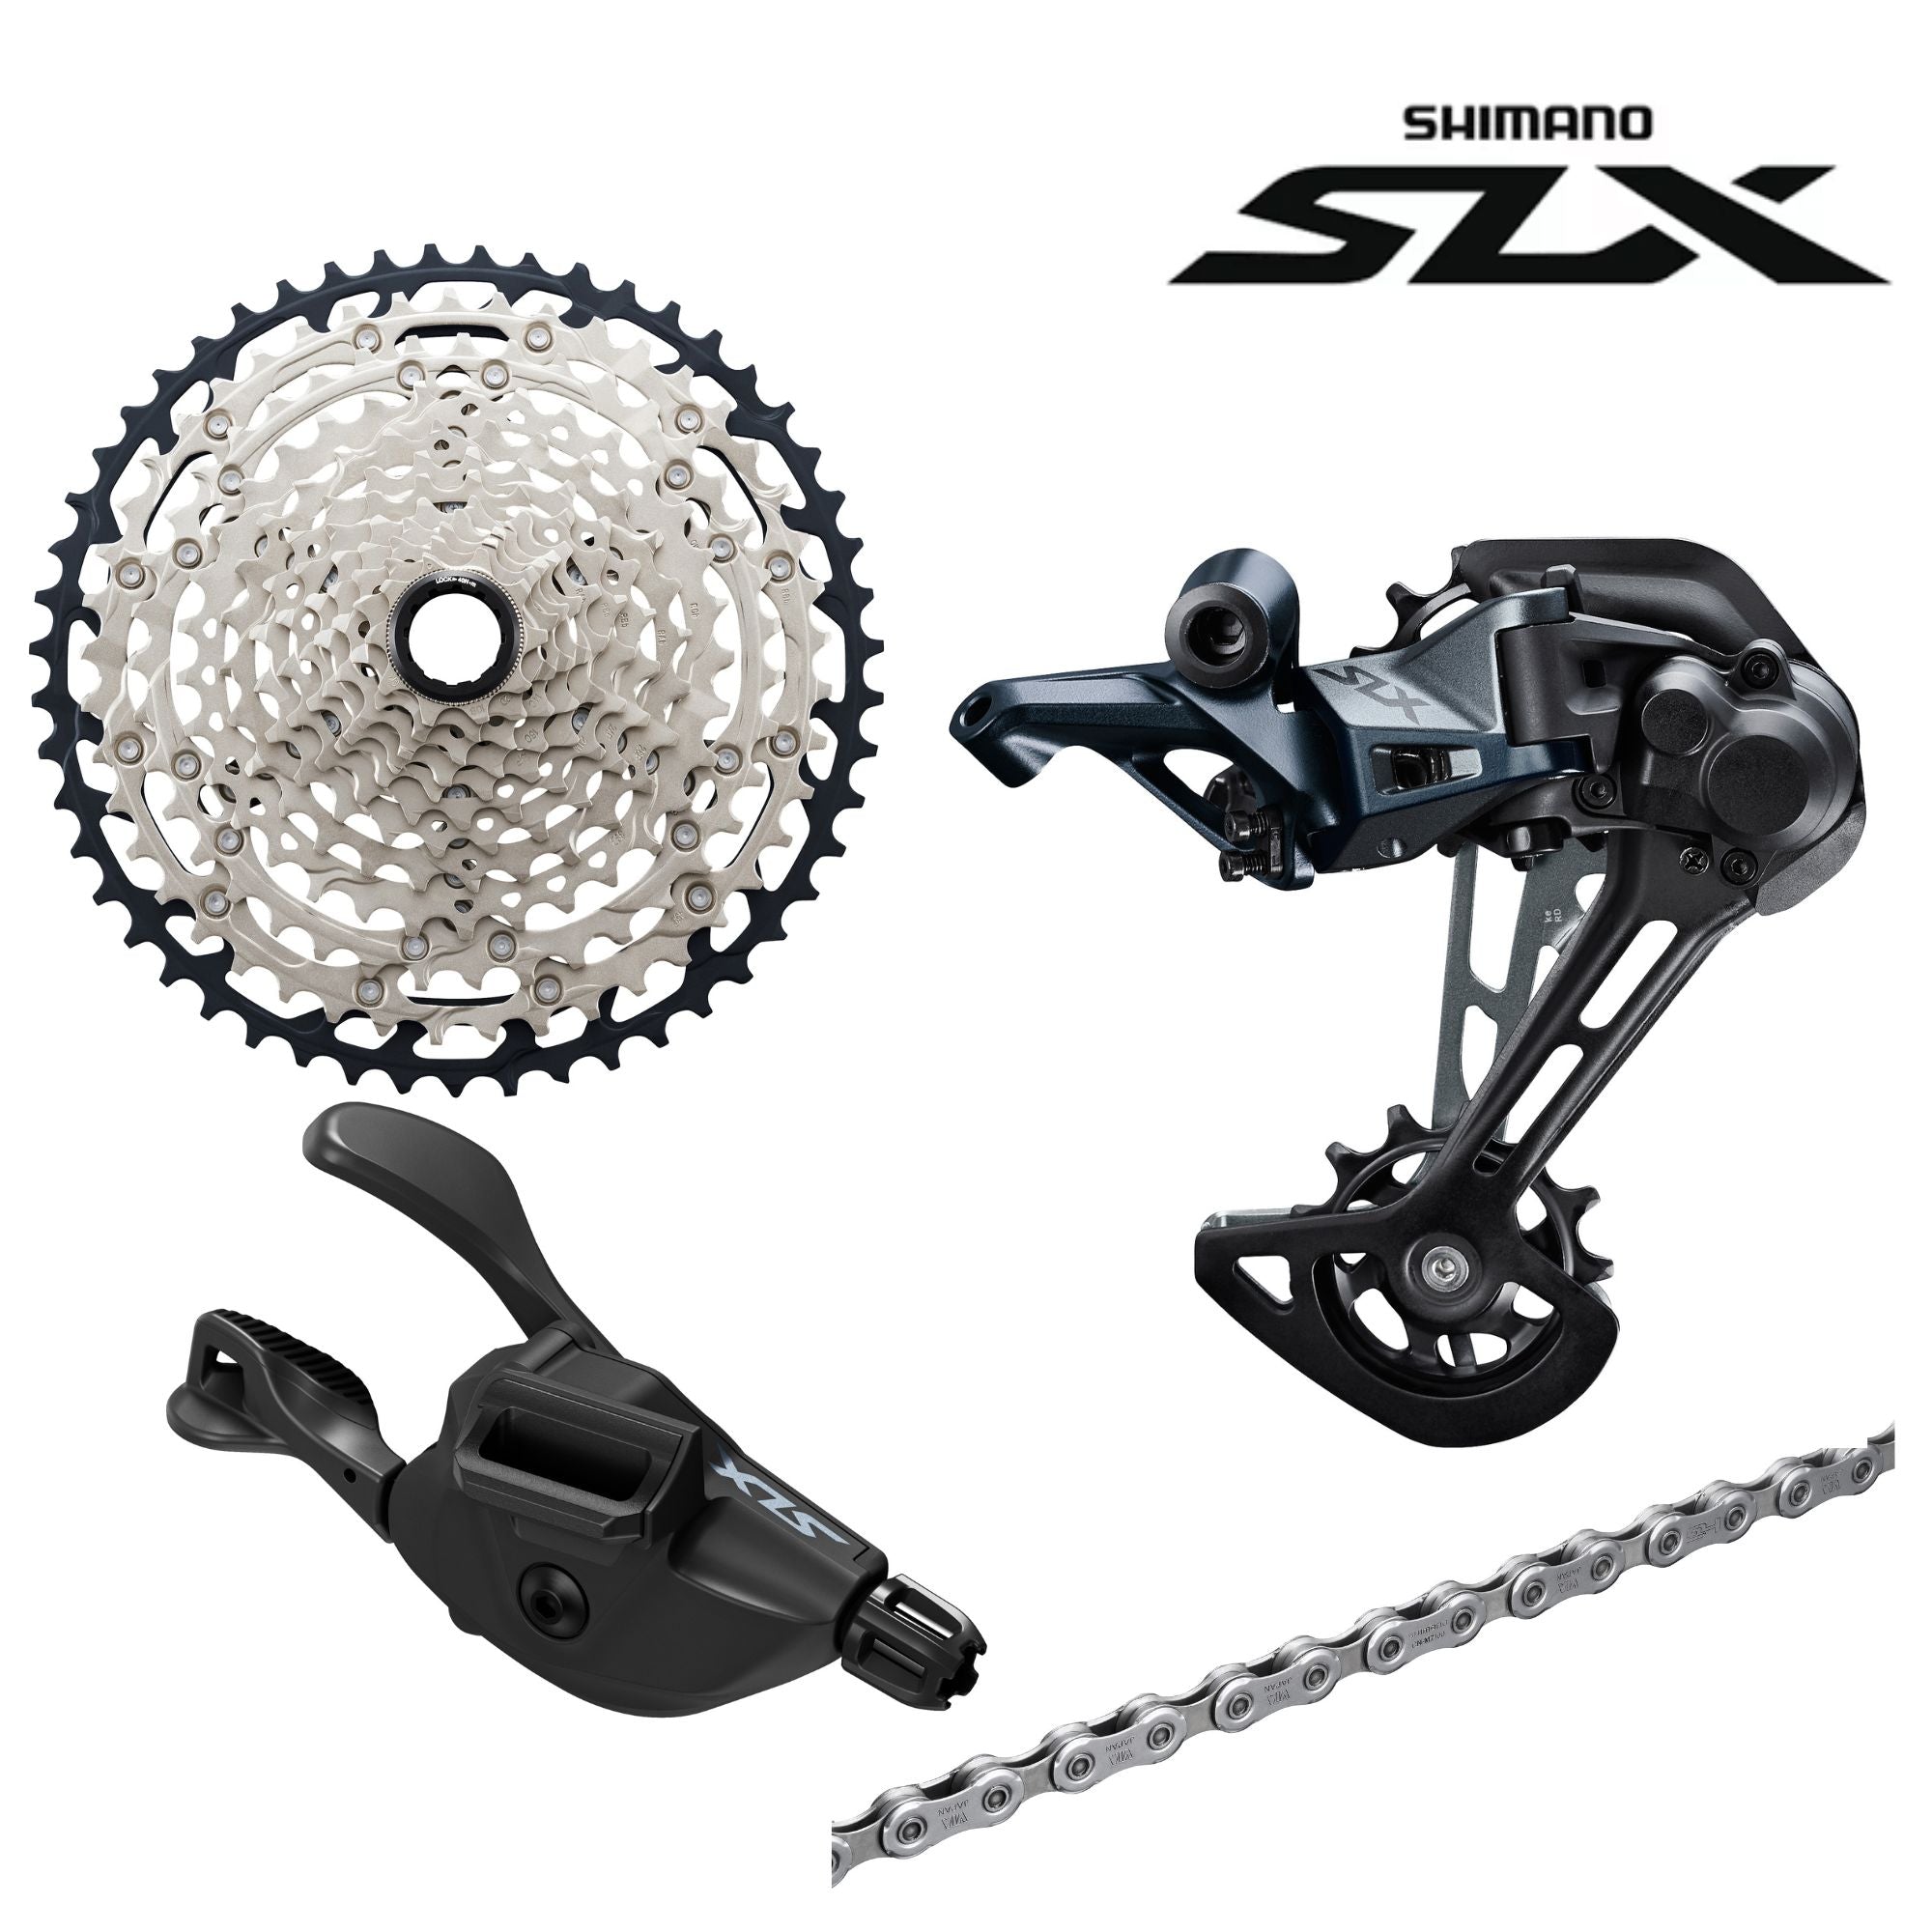 Wholesale Shimano SLX To Level Up Your Cycling Game 